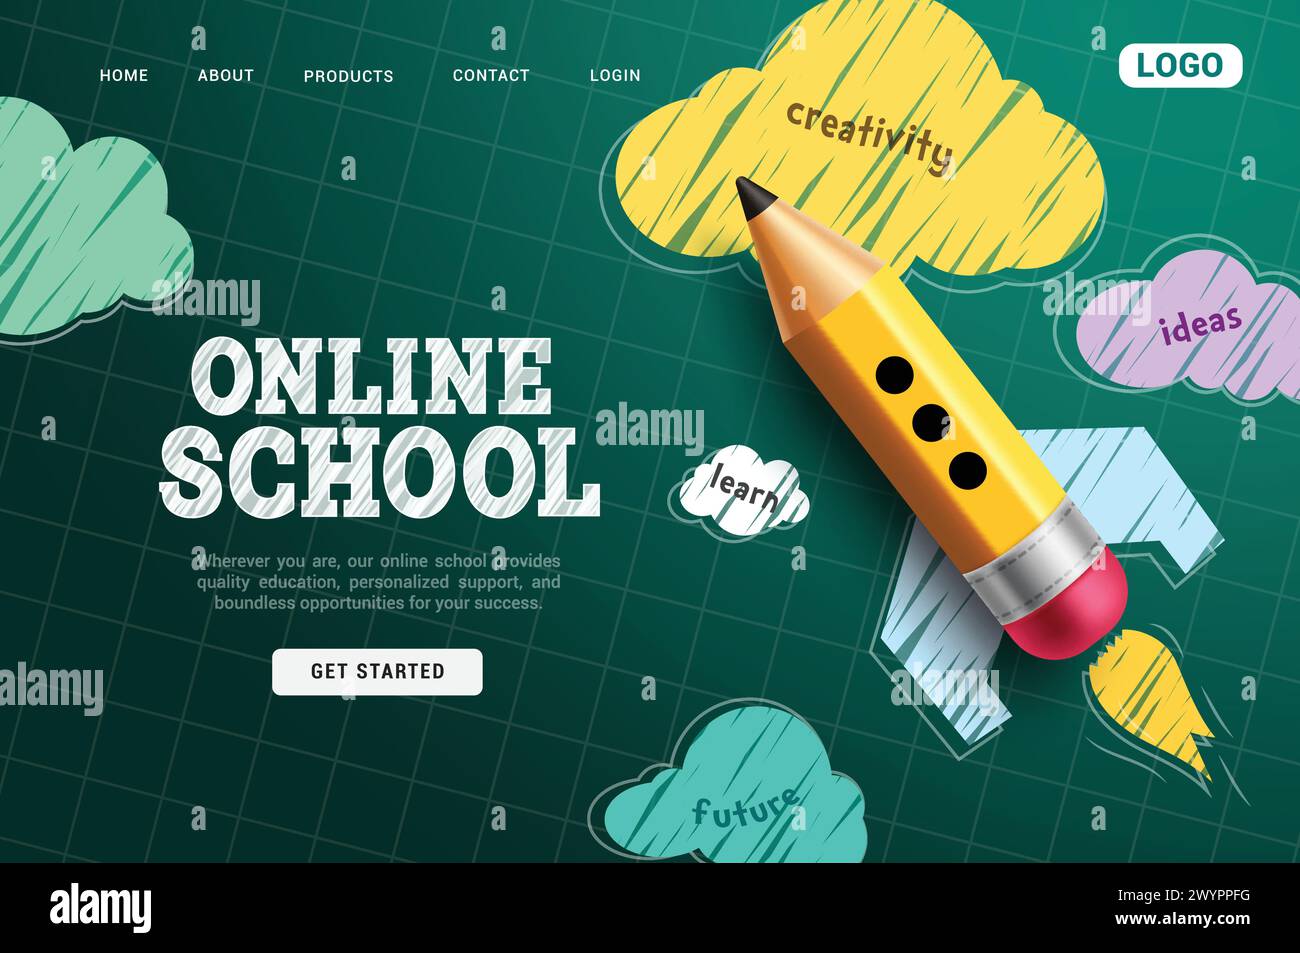 Online school vector template design. Back to school online tutorials and courses website home page for distance education and e learning application Stock Vector